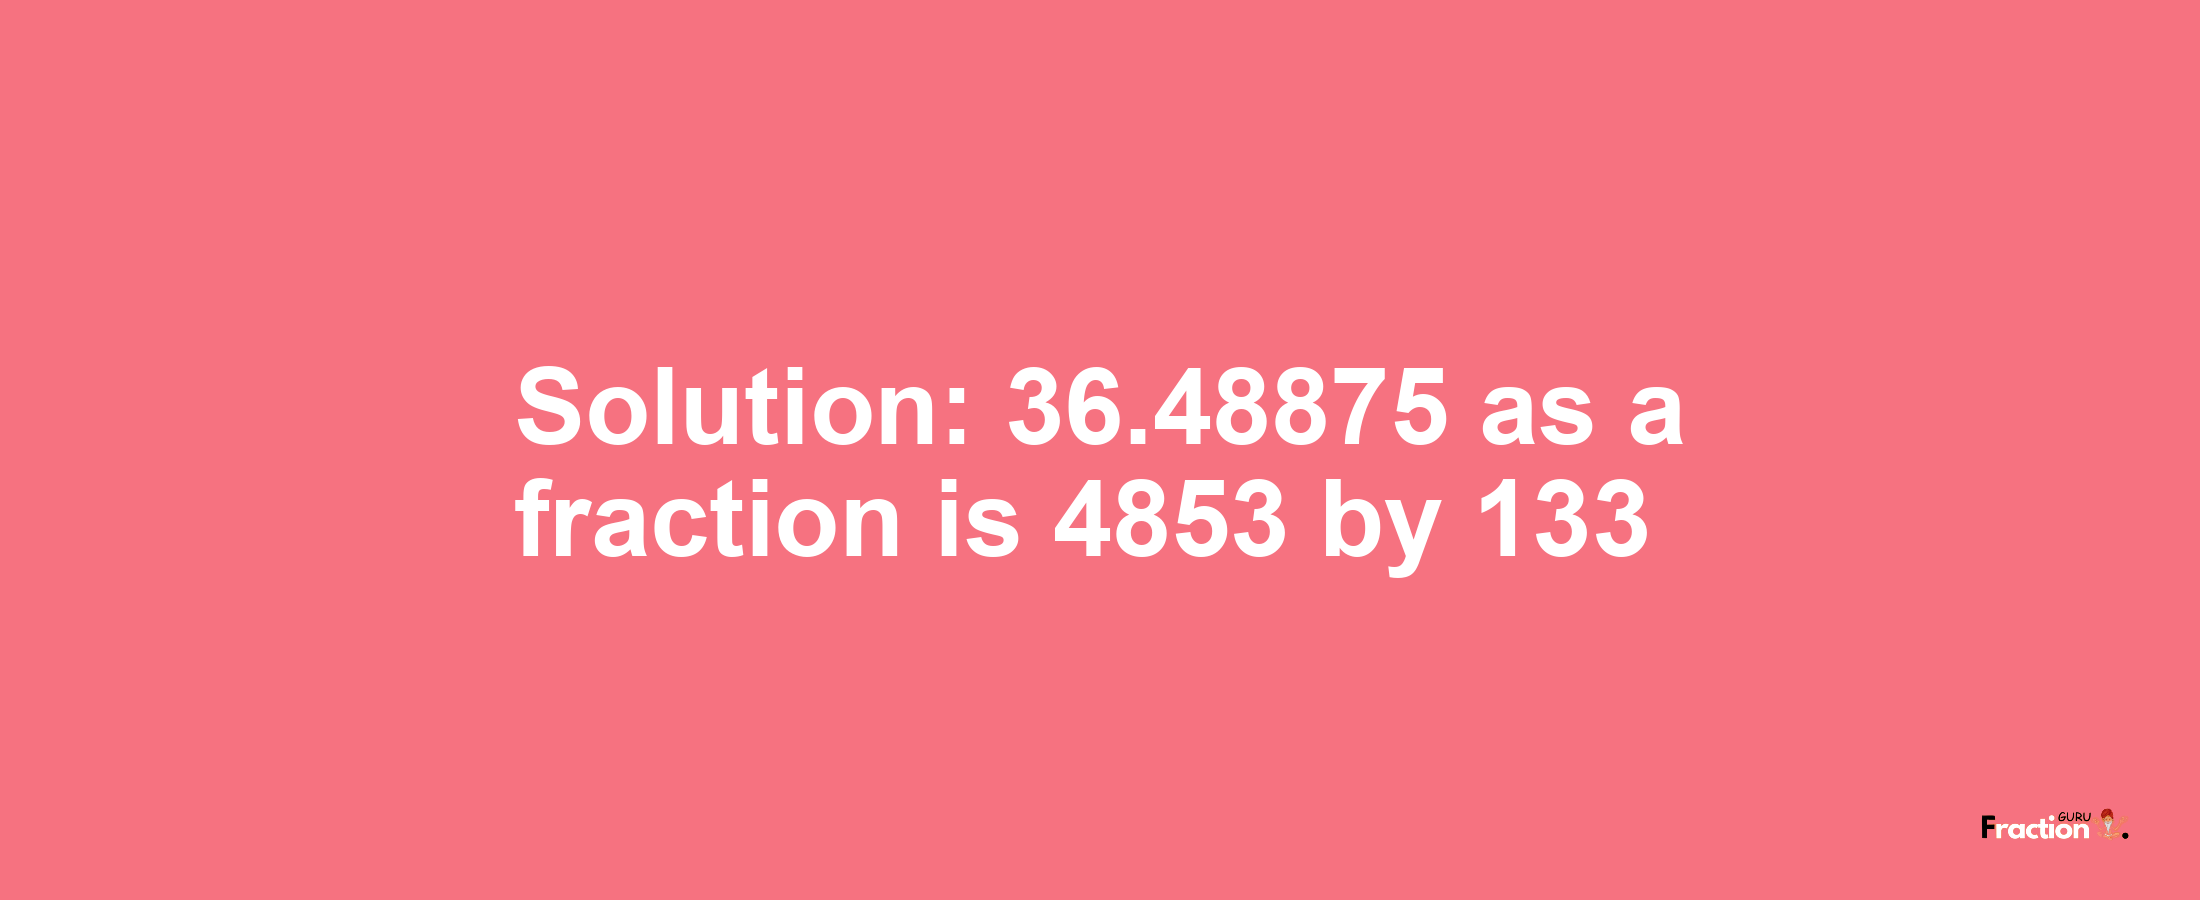 Solution:36.48875 as a fraction is 4853/133